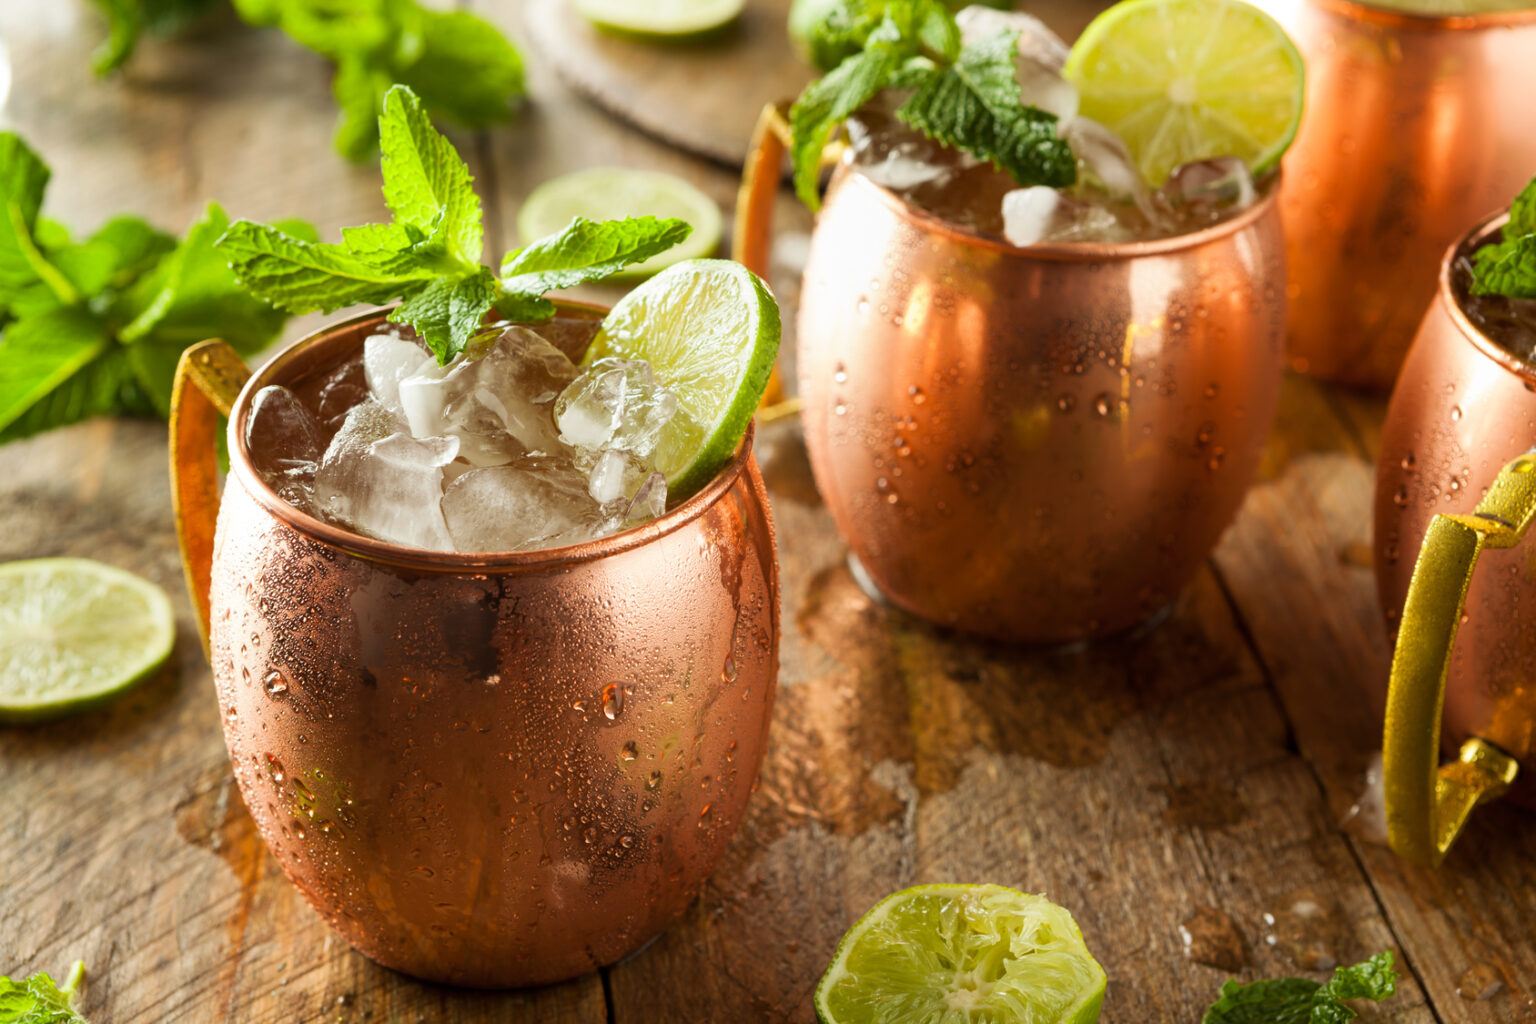 Moscow Mule | Cocktail-Rezept mit Ginger Beer